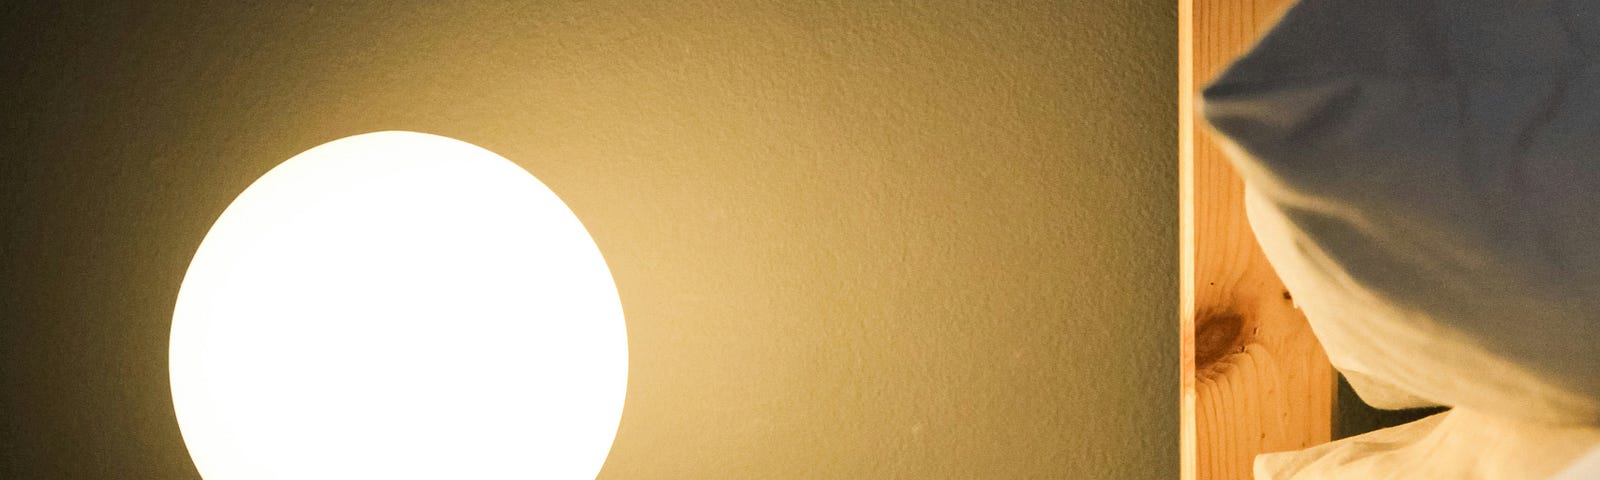 A bright lamp next to the bed.